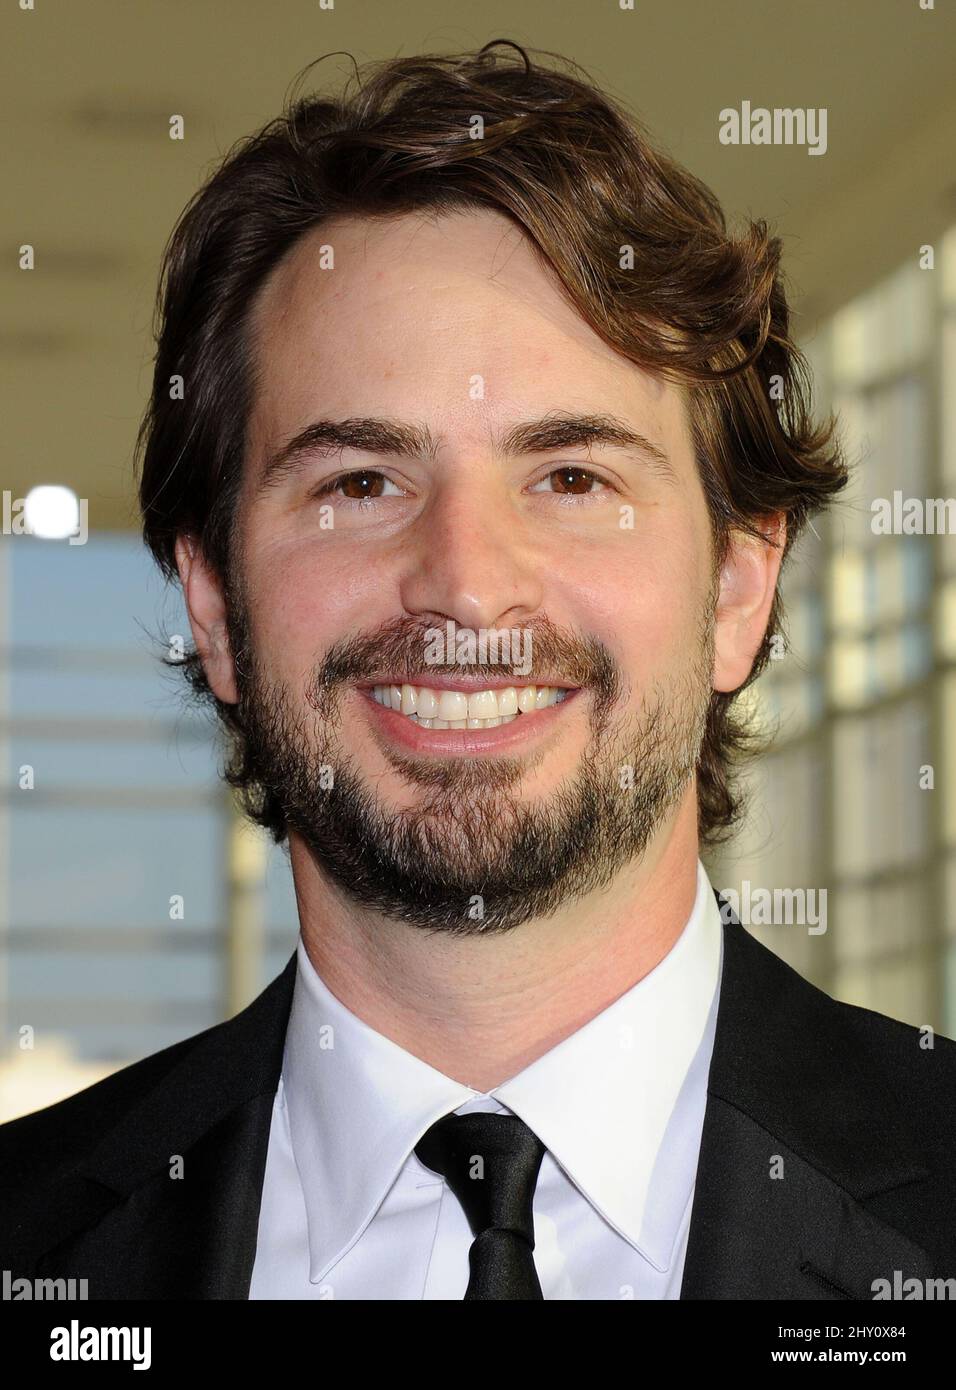 Mark Boal attending the 2013 Writers Guild Awards held at the JW Marriott in Los Angeles, California. Stock Photo